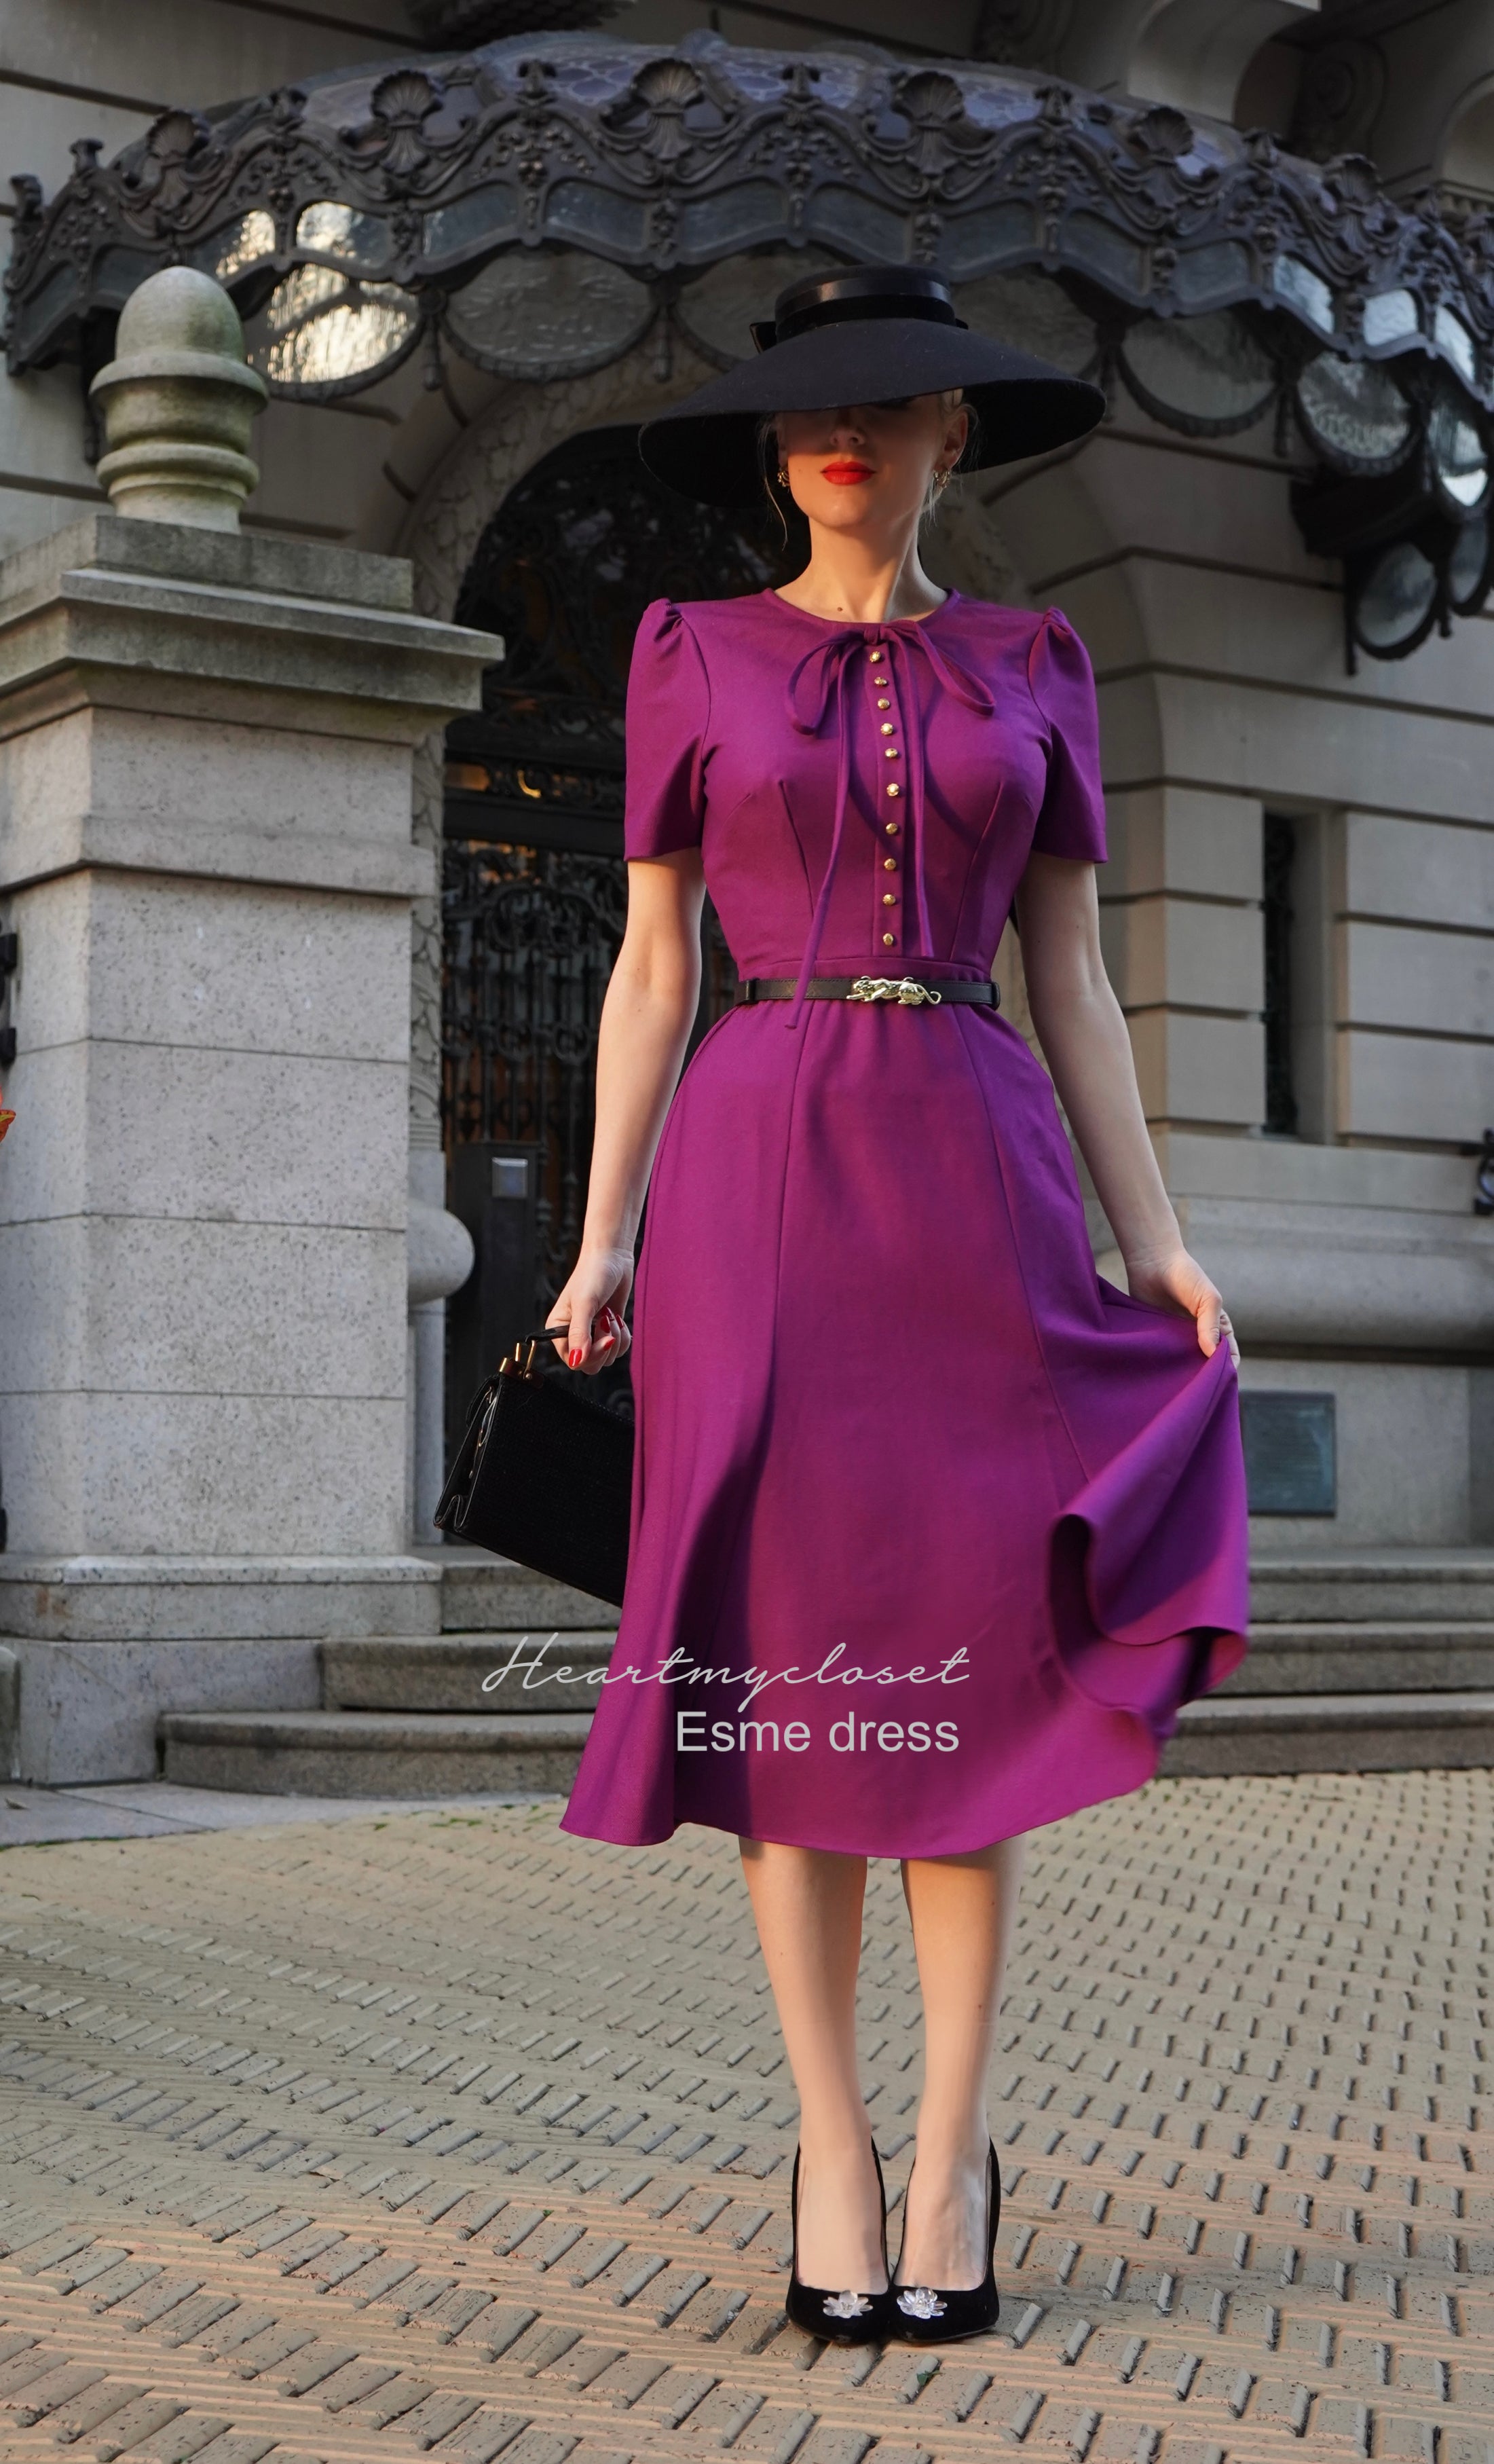  YMUQEIGH Vintage Dress for Women Retro 1950s Style